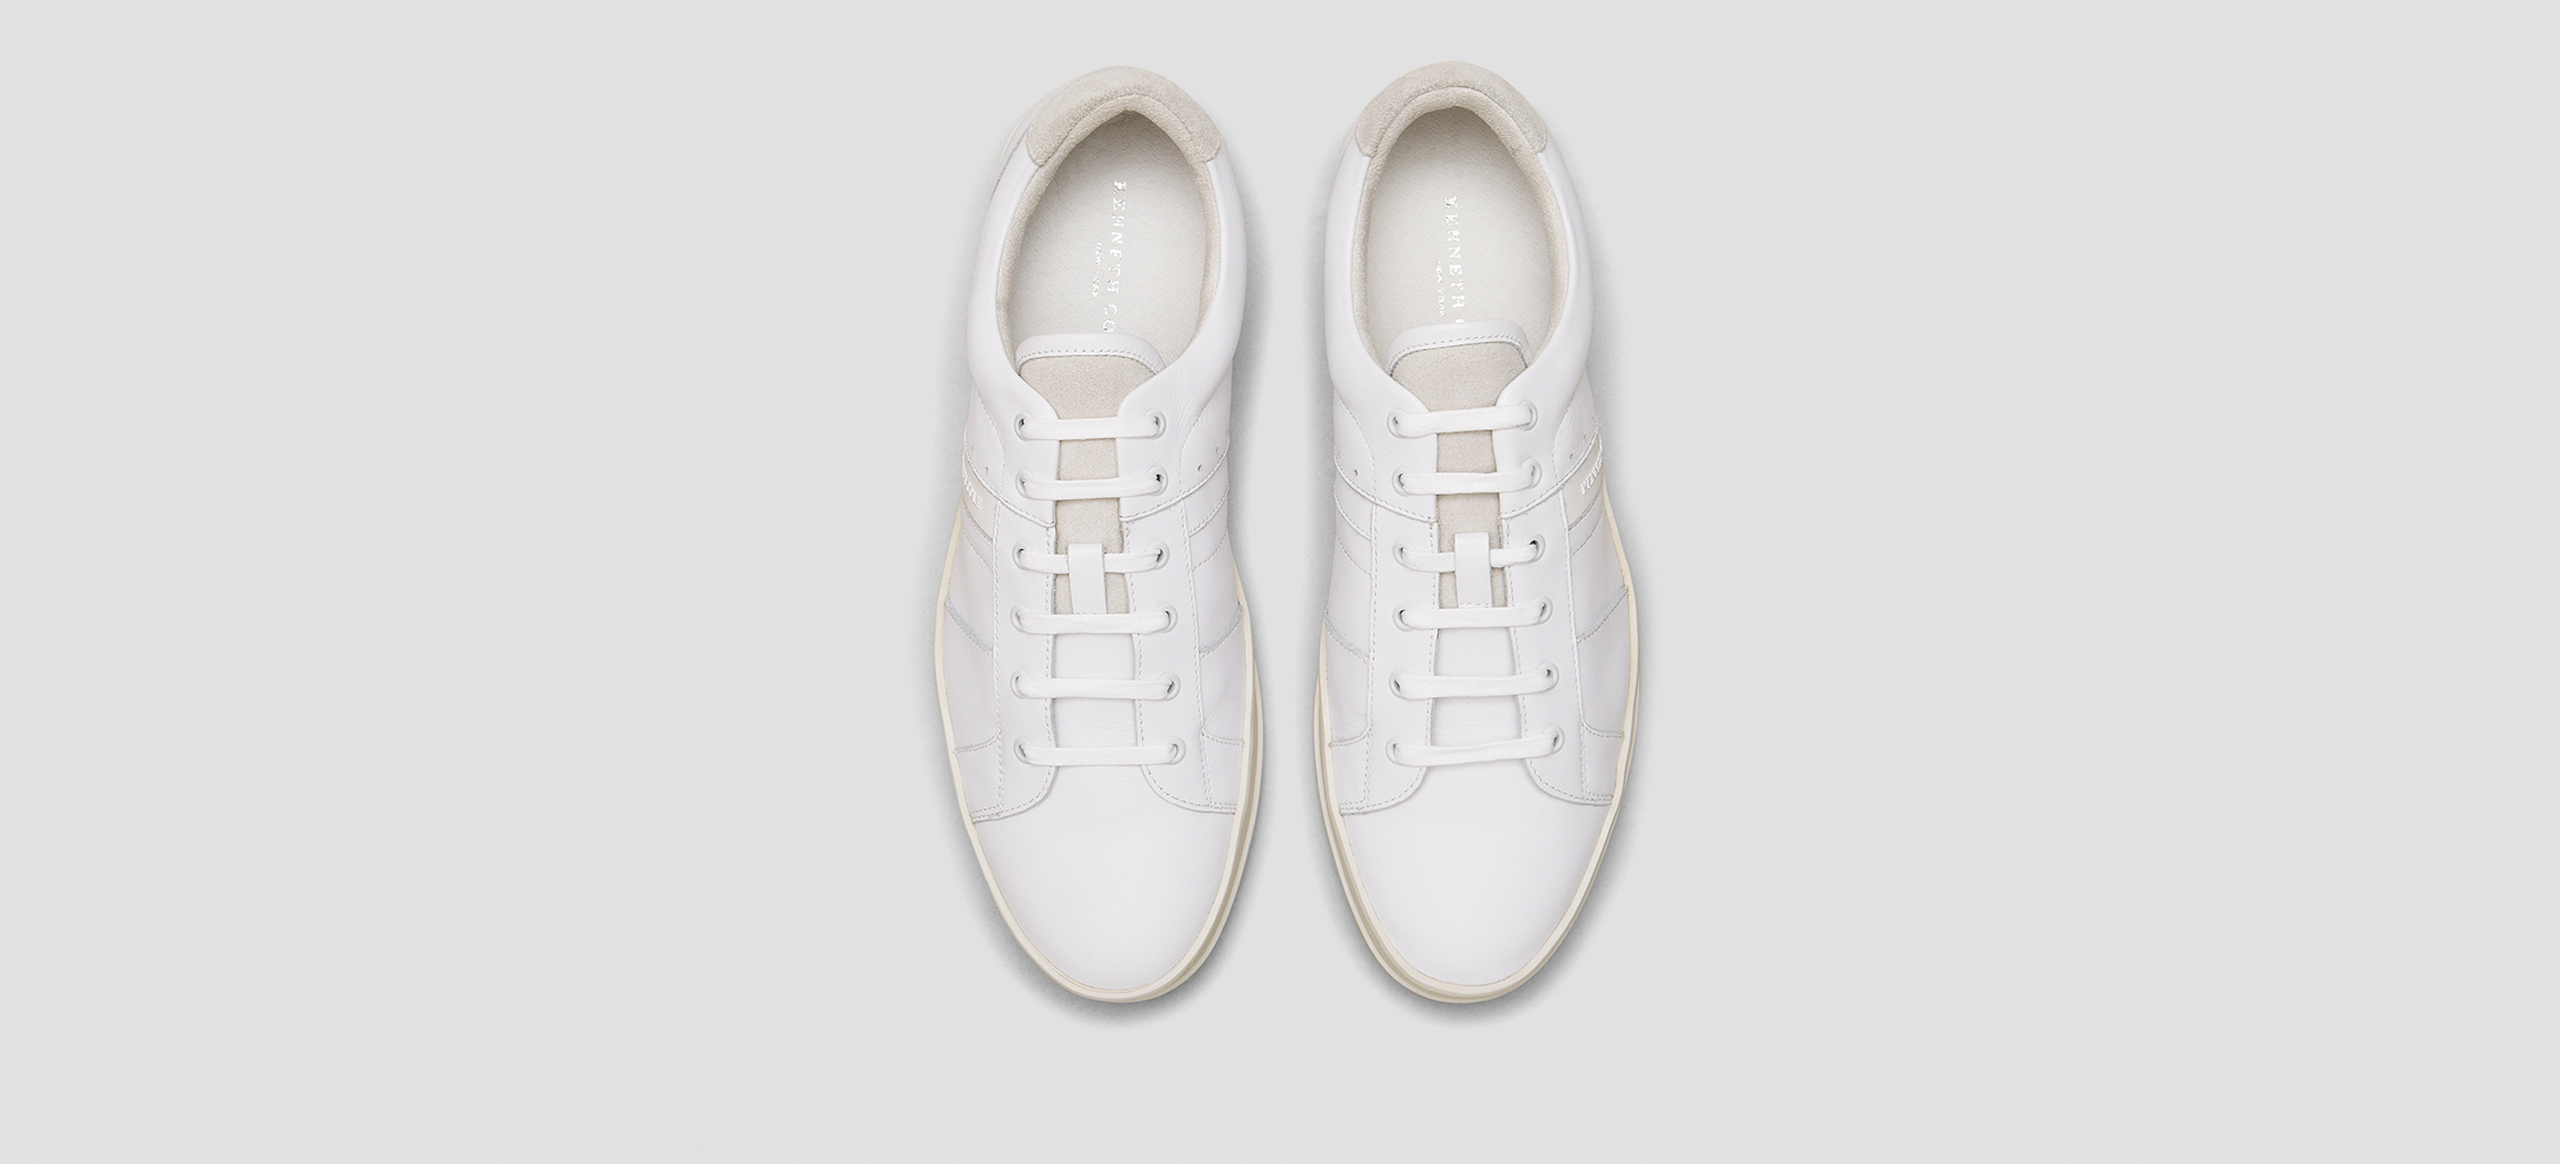 Kenneth Cole Brand Leader Leather Tennis Sneaker in White for Men - Lyst